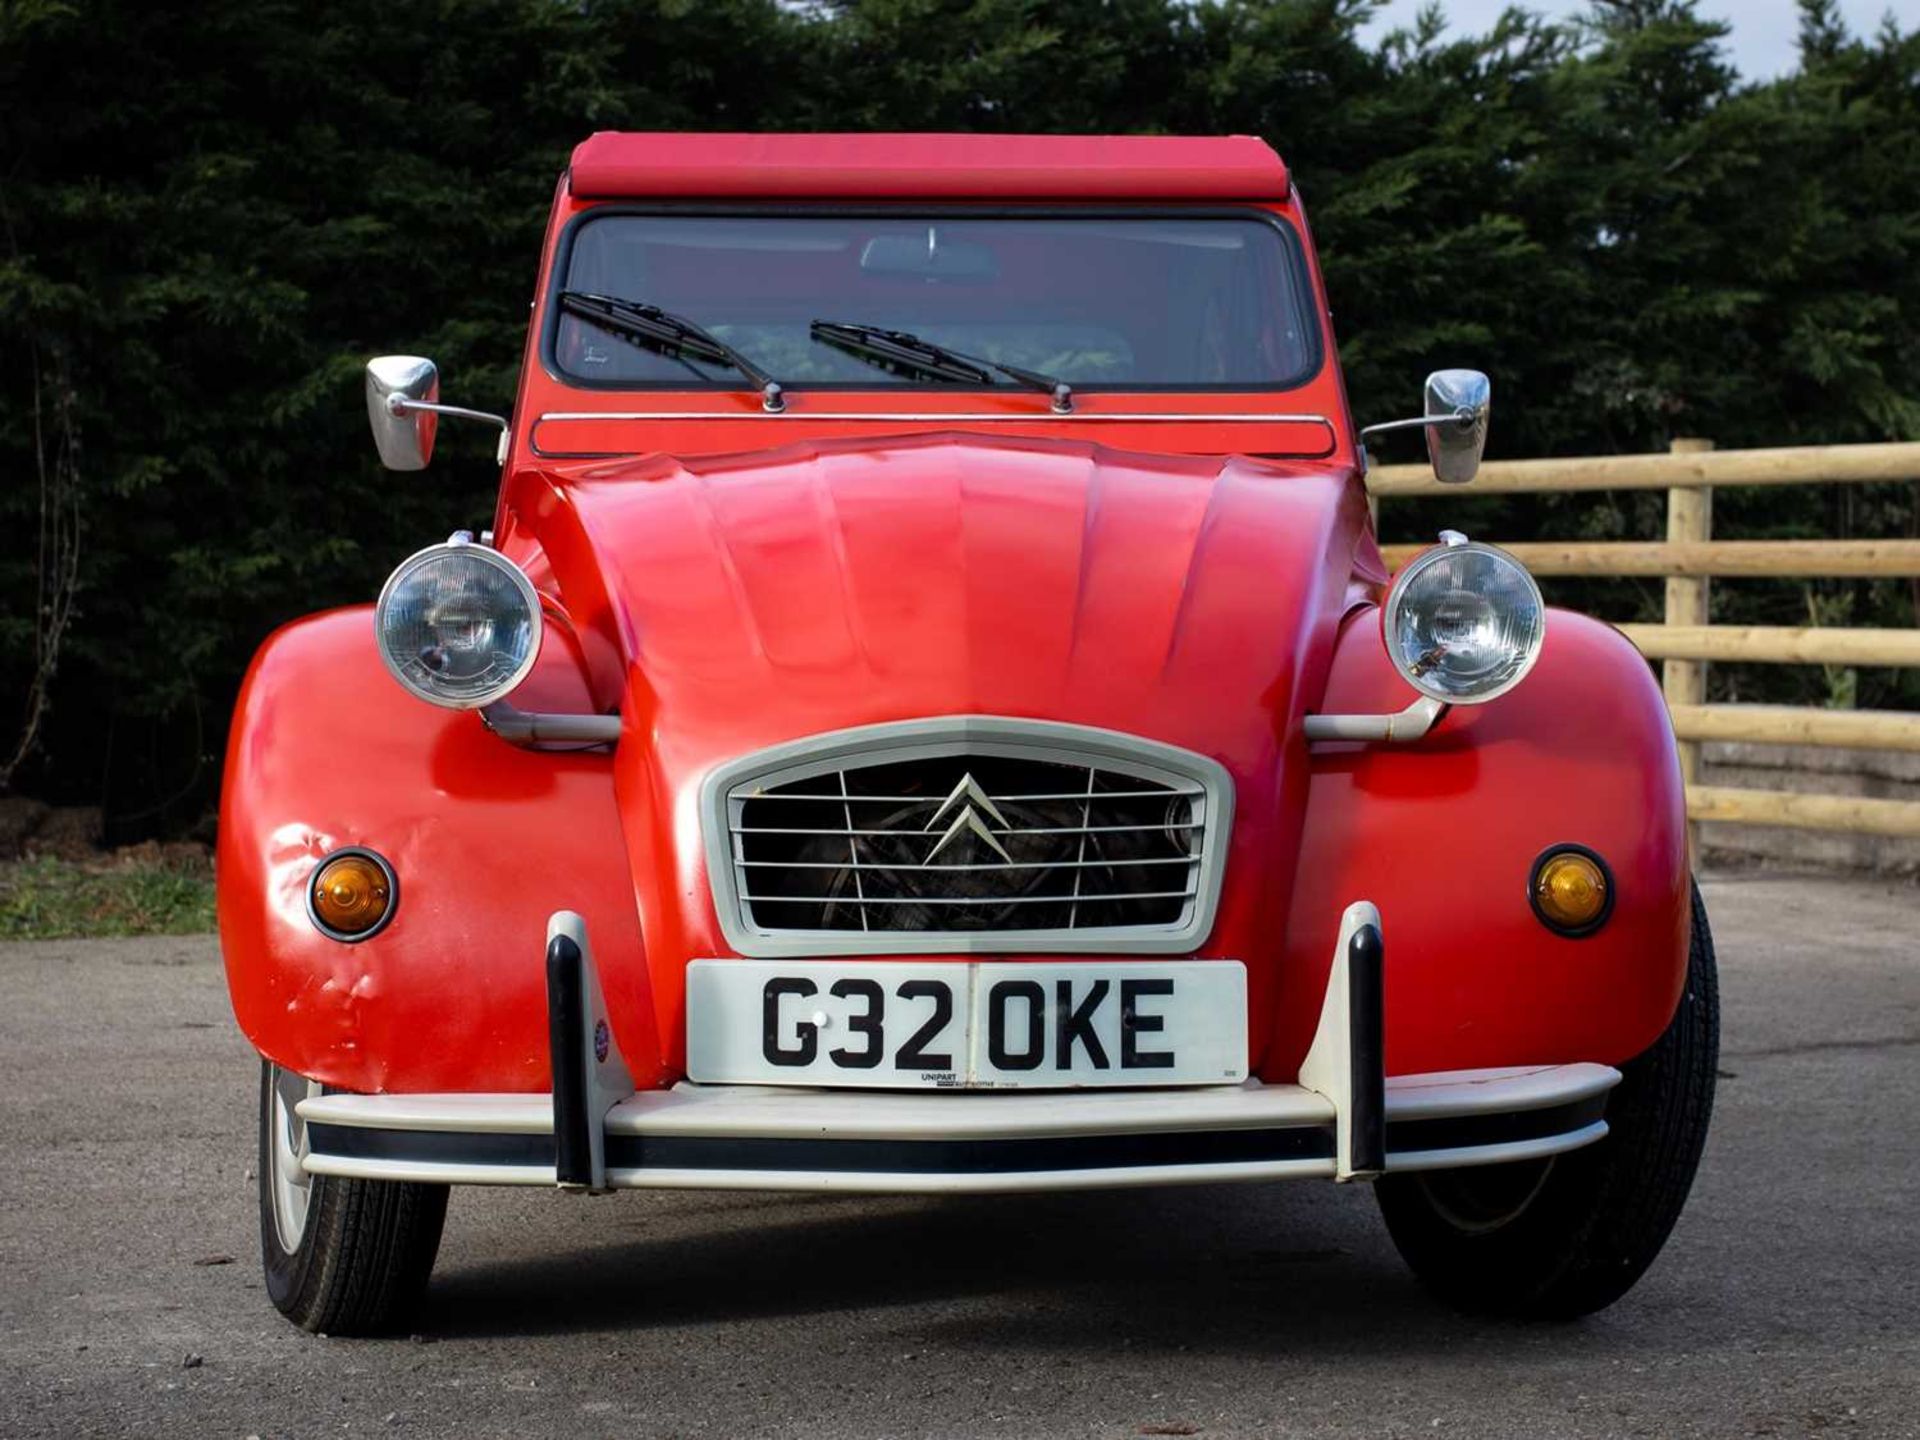 1989 Citroën 2CV6 Spécial Believed to have covered a credible 15,000 miles - Image 32 of 113